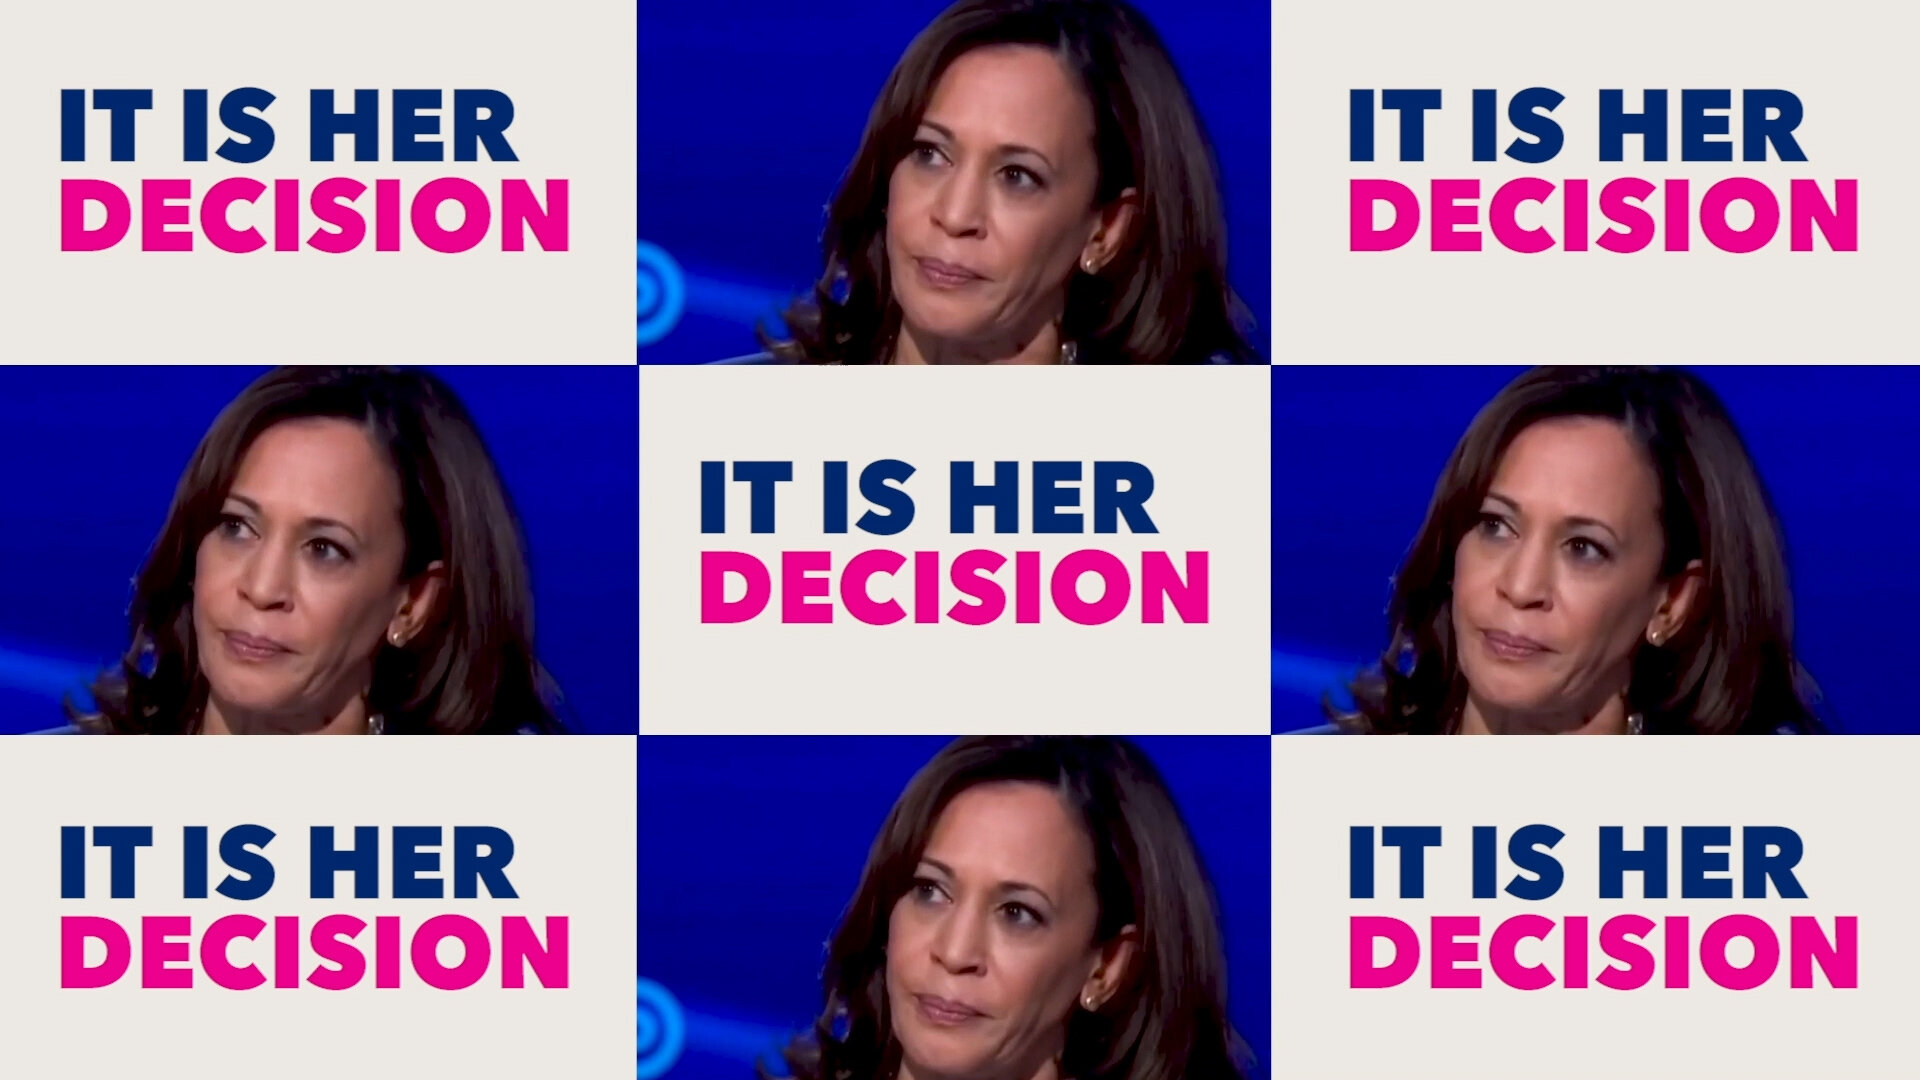 It is her decision.jpg